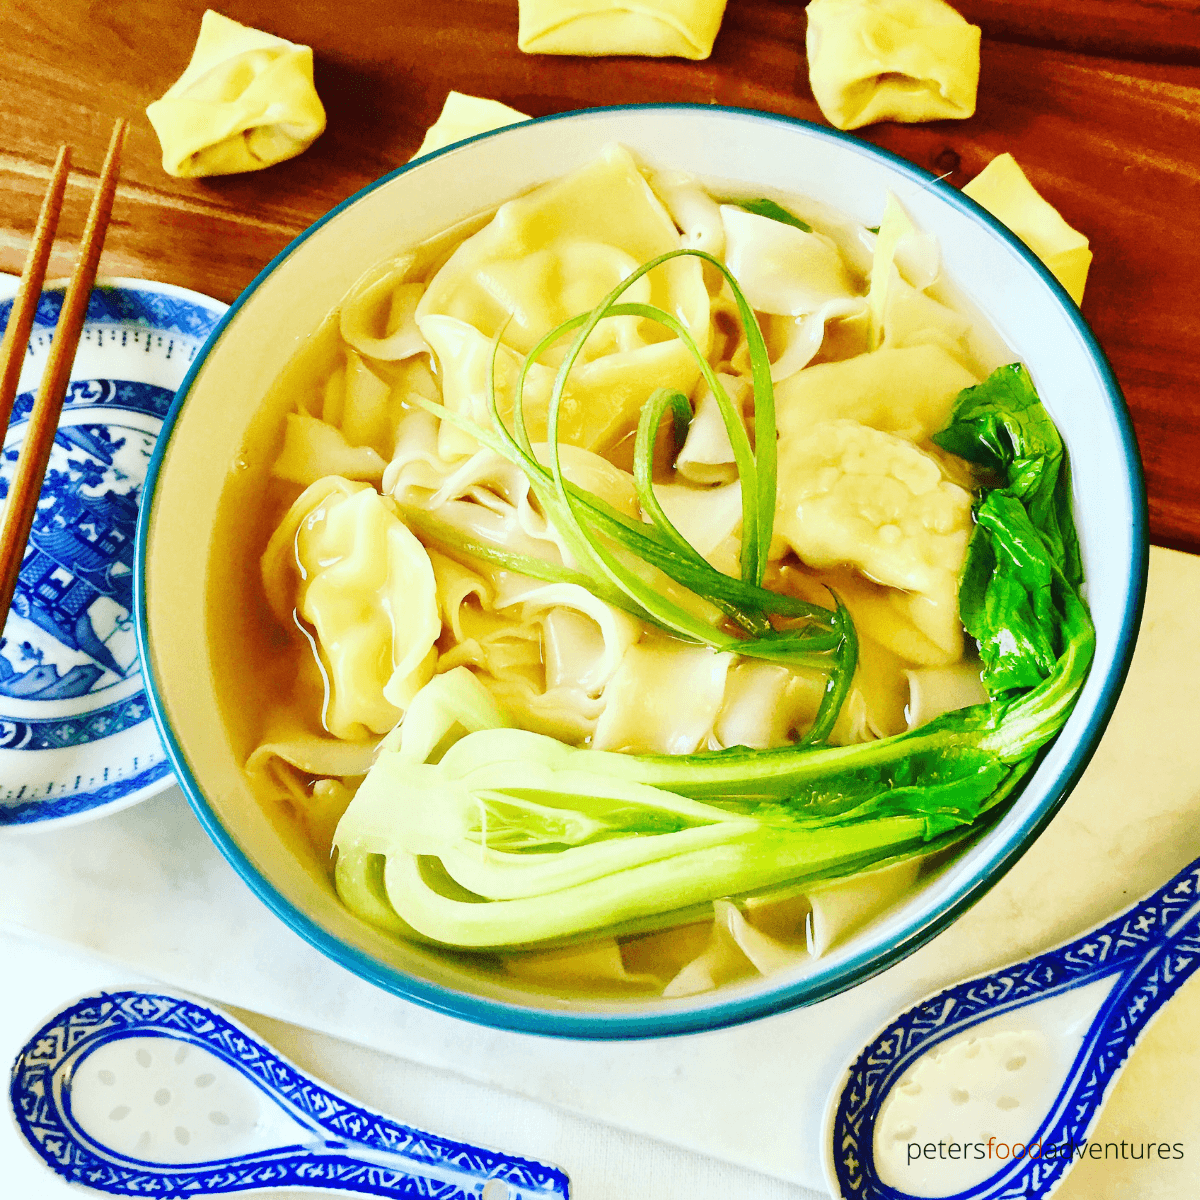 Authentic Wonton Noodle Soup recipe made with fresh wonton wrappers, chicken, ginger and garlic. Easy step by step instructions on wonton making, a healthy lunch or dinner and tasty Asian soup recipe. Chinese Chicken Wonton Noodle Soup Recipe